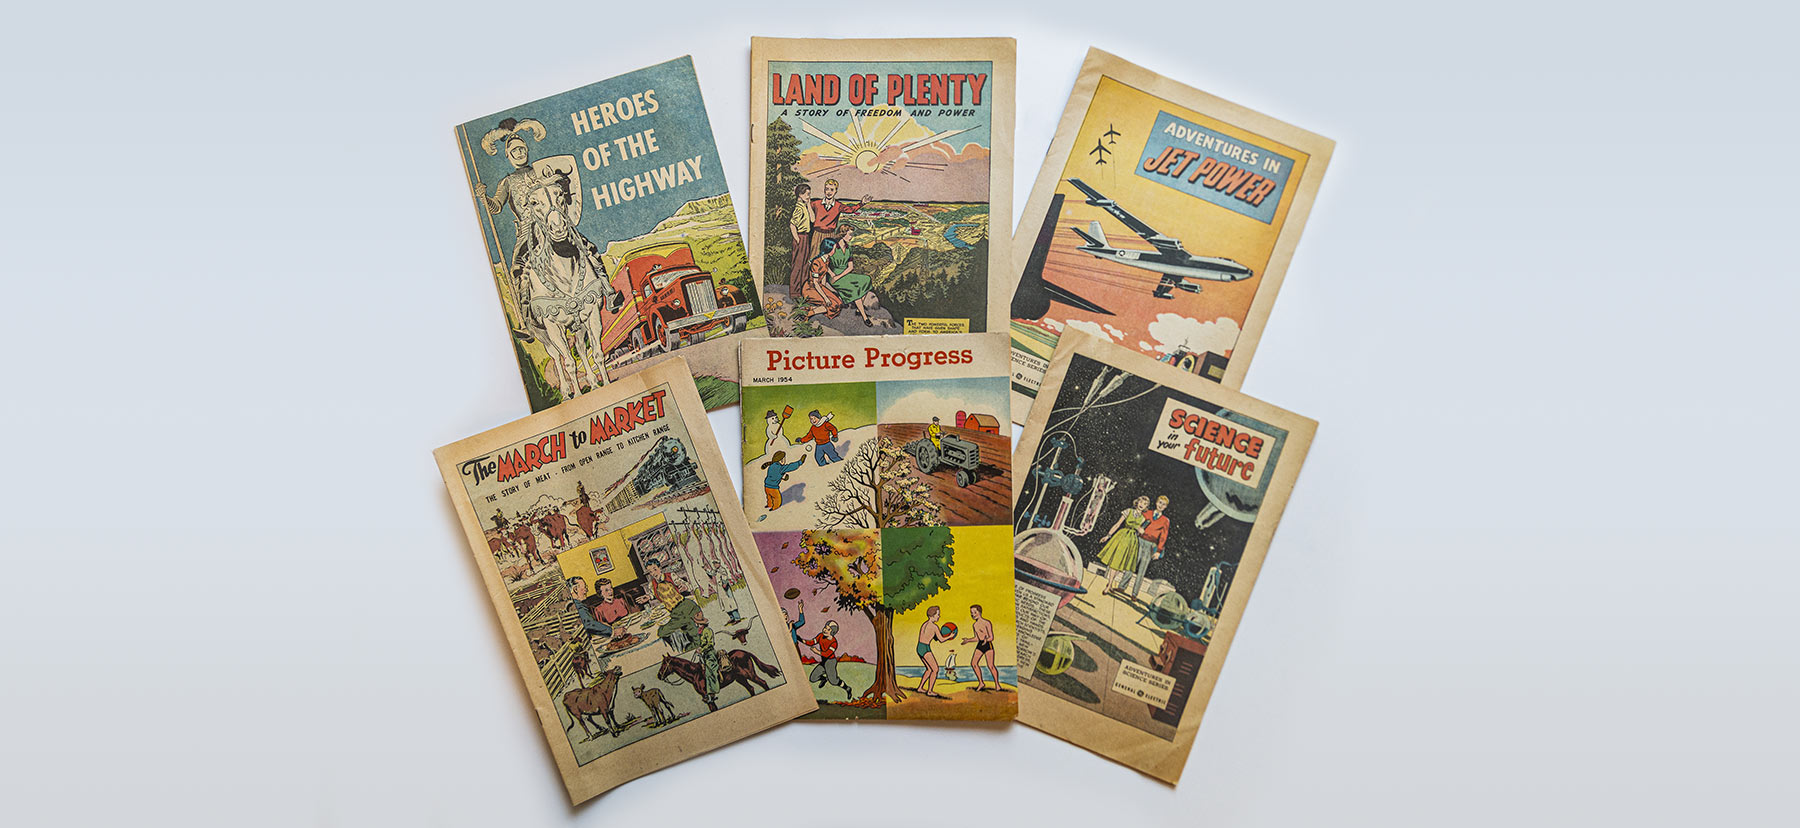 A collection of promotional and educational comic books